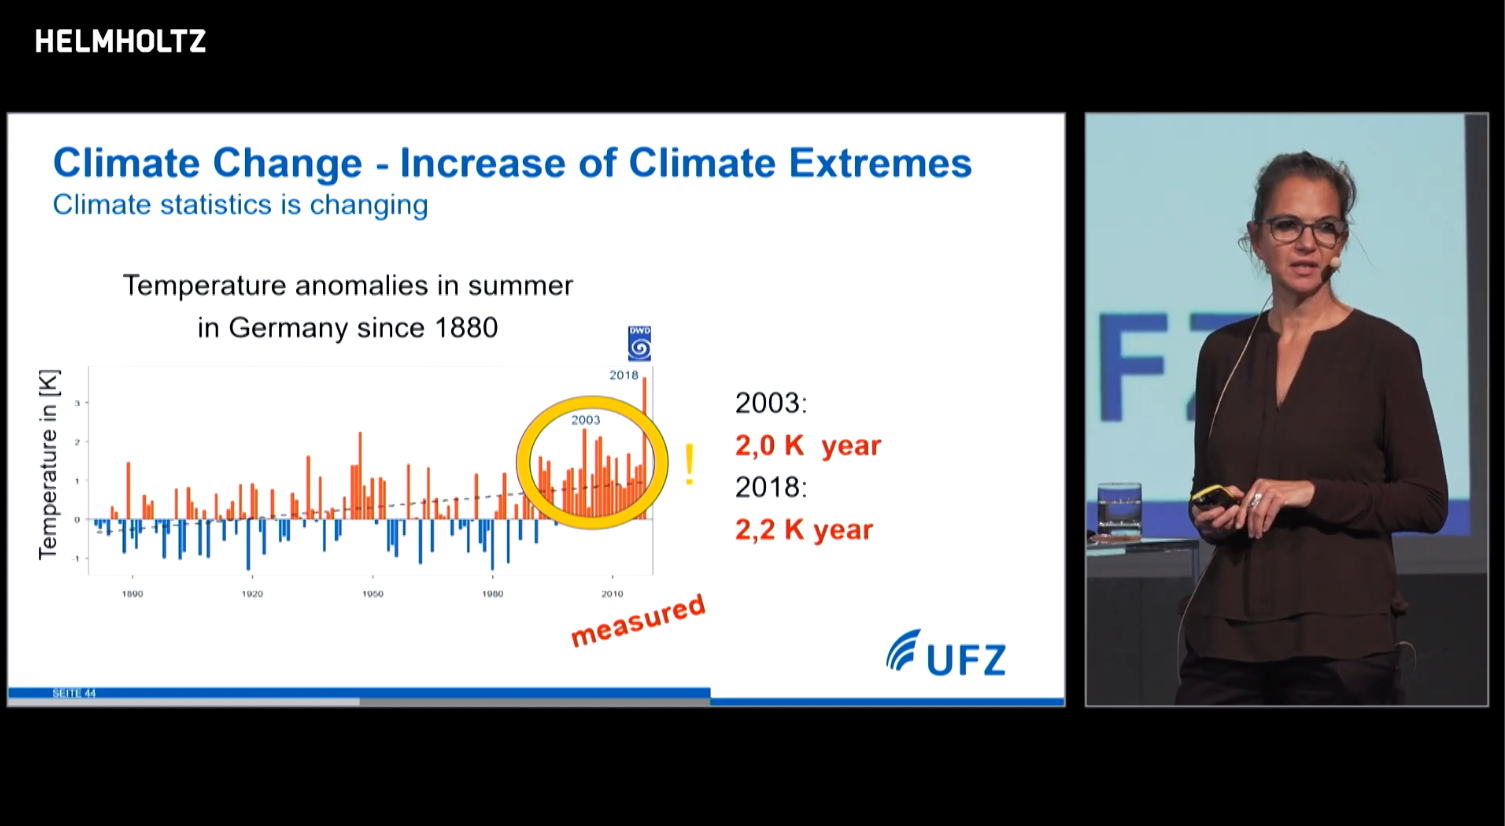 Climate Change - Increase of Climate Extremes. Source: Helmholtz Gemeinschaft / youtube